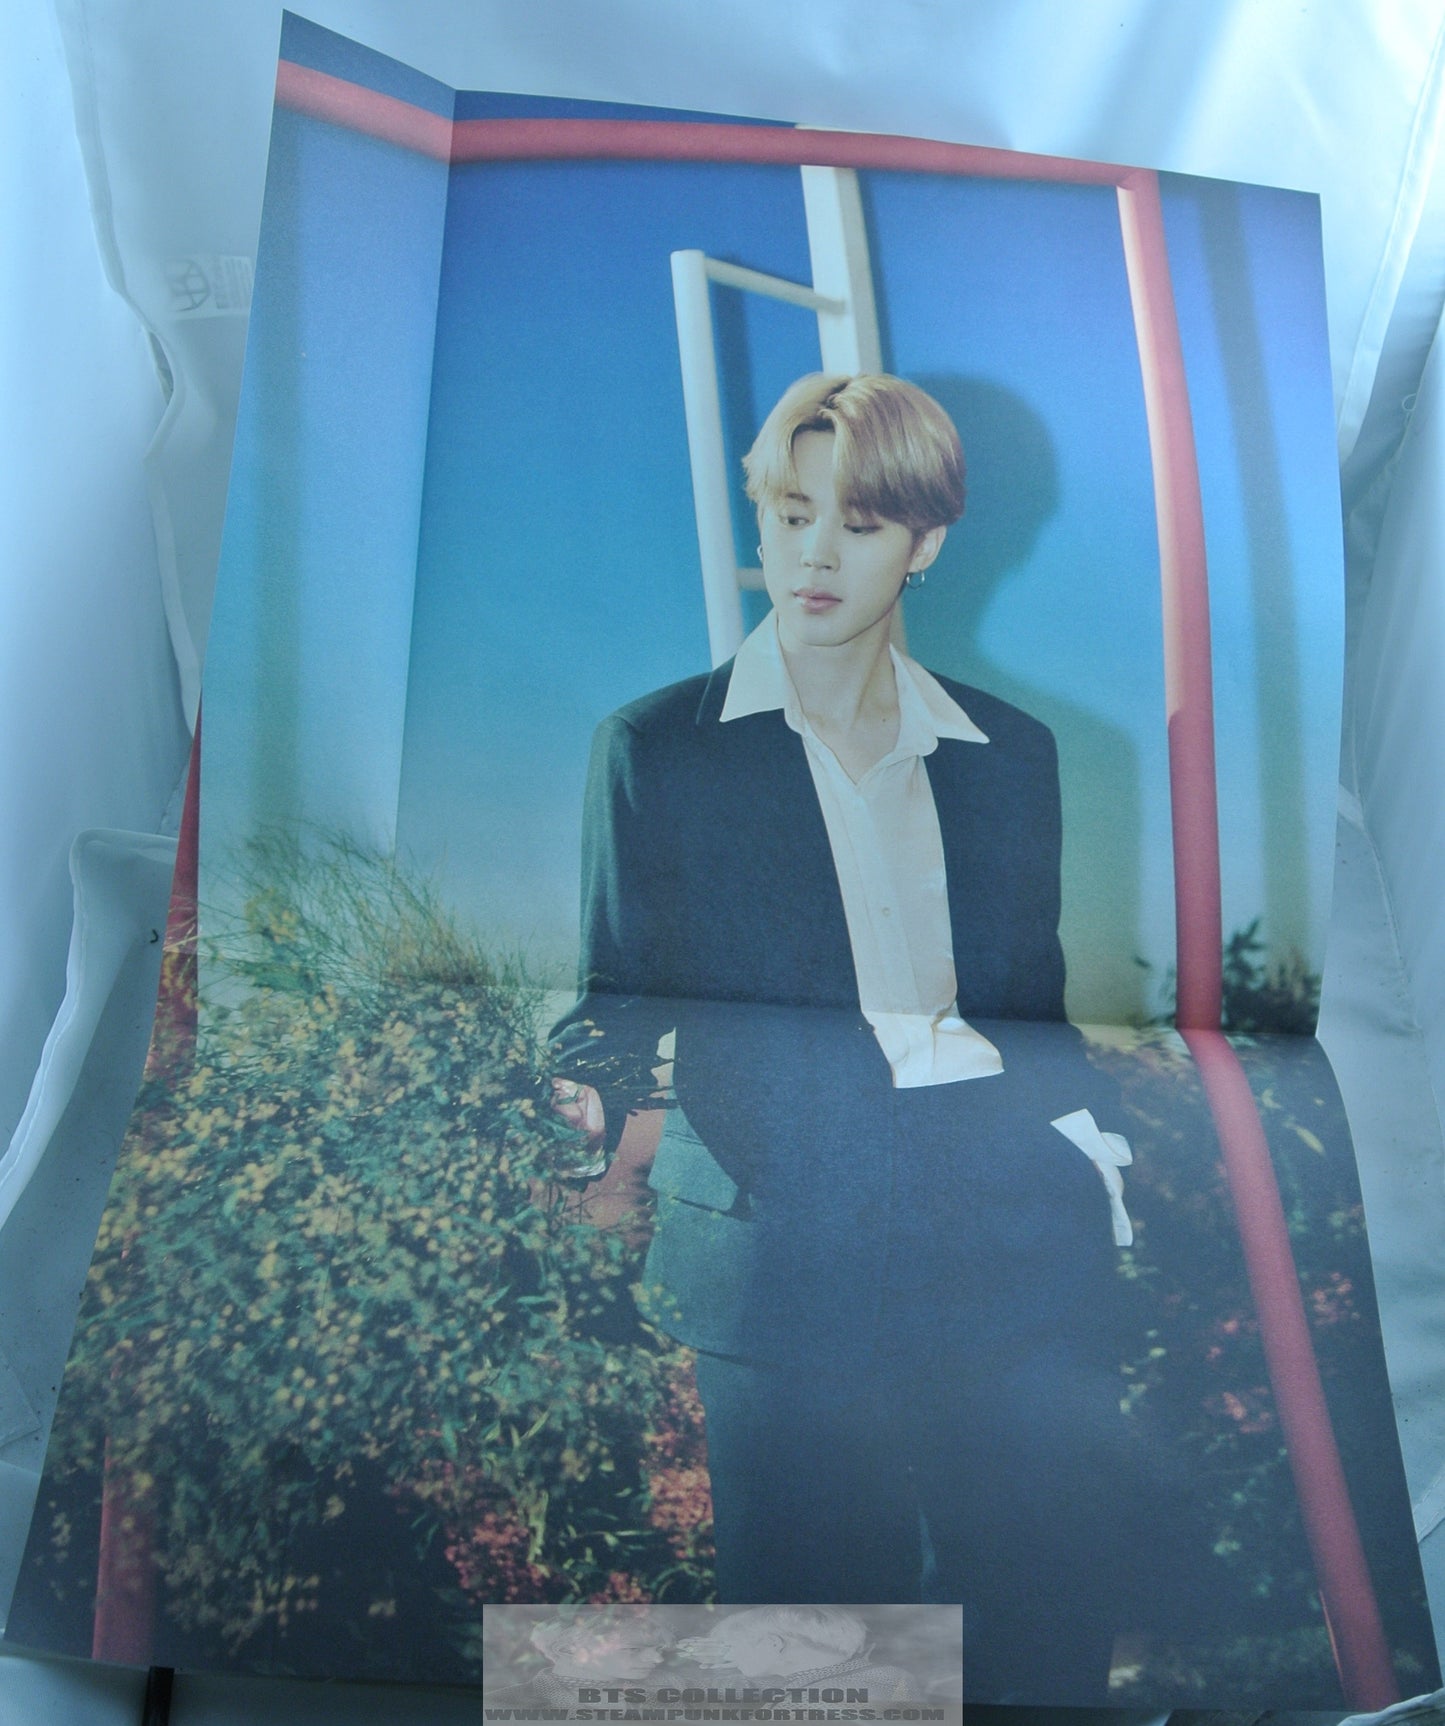 BTS JIMIN PARK FOLDED POSTER FLOWERS LADDER COLOR 20.25" X 14.5" HYBE INSIGHT LIMITED EDITION OFFICIAL MERCHANDISE